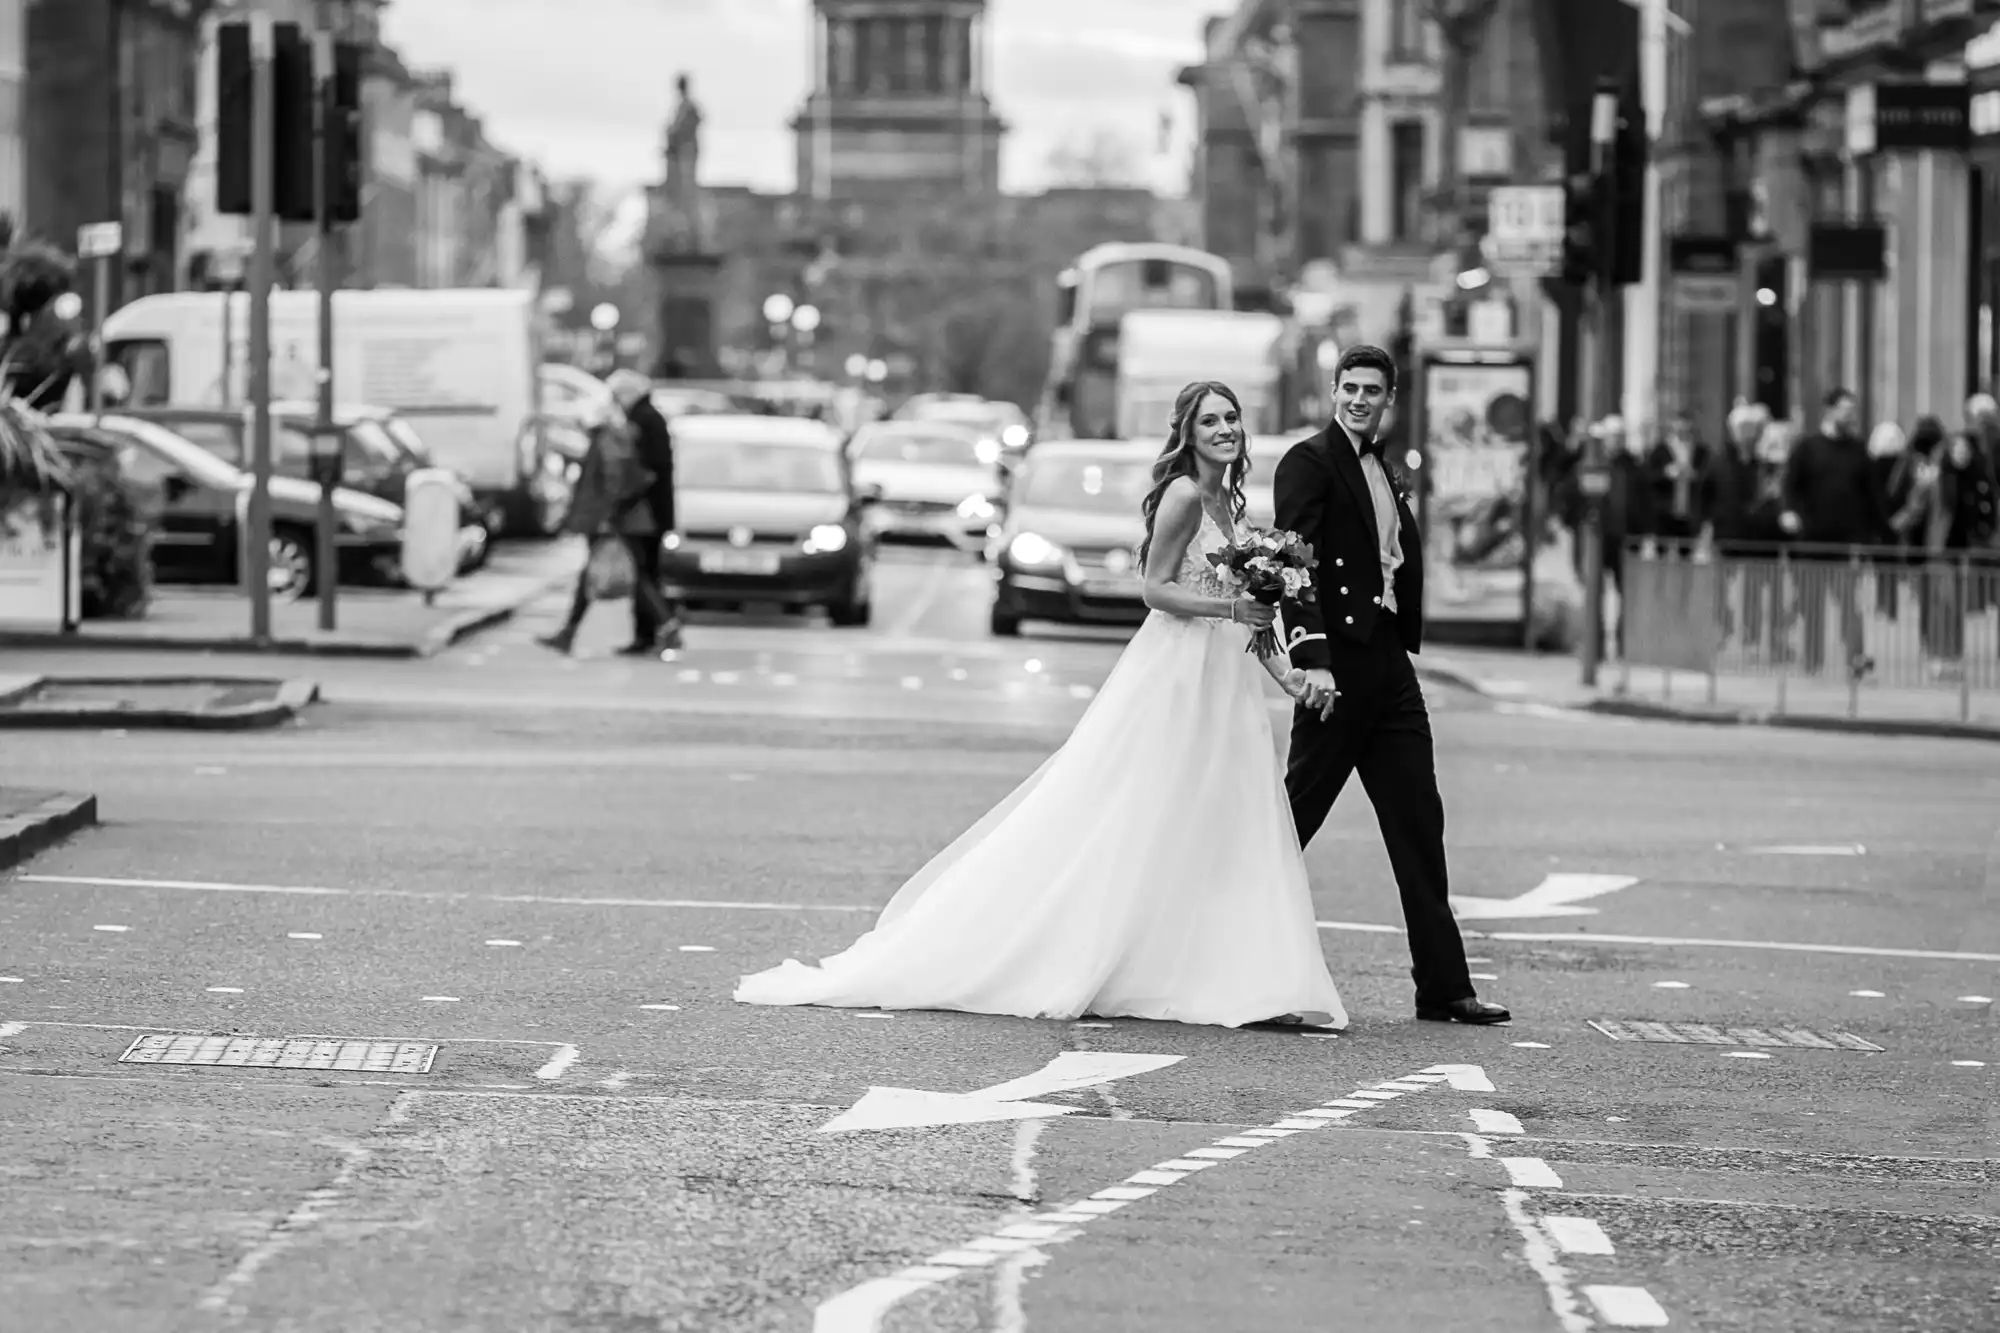 A bride and groom walk hand in hand across a busy street in a city, with cars, buses, and pedestrians in the background.